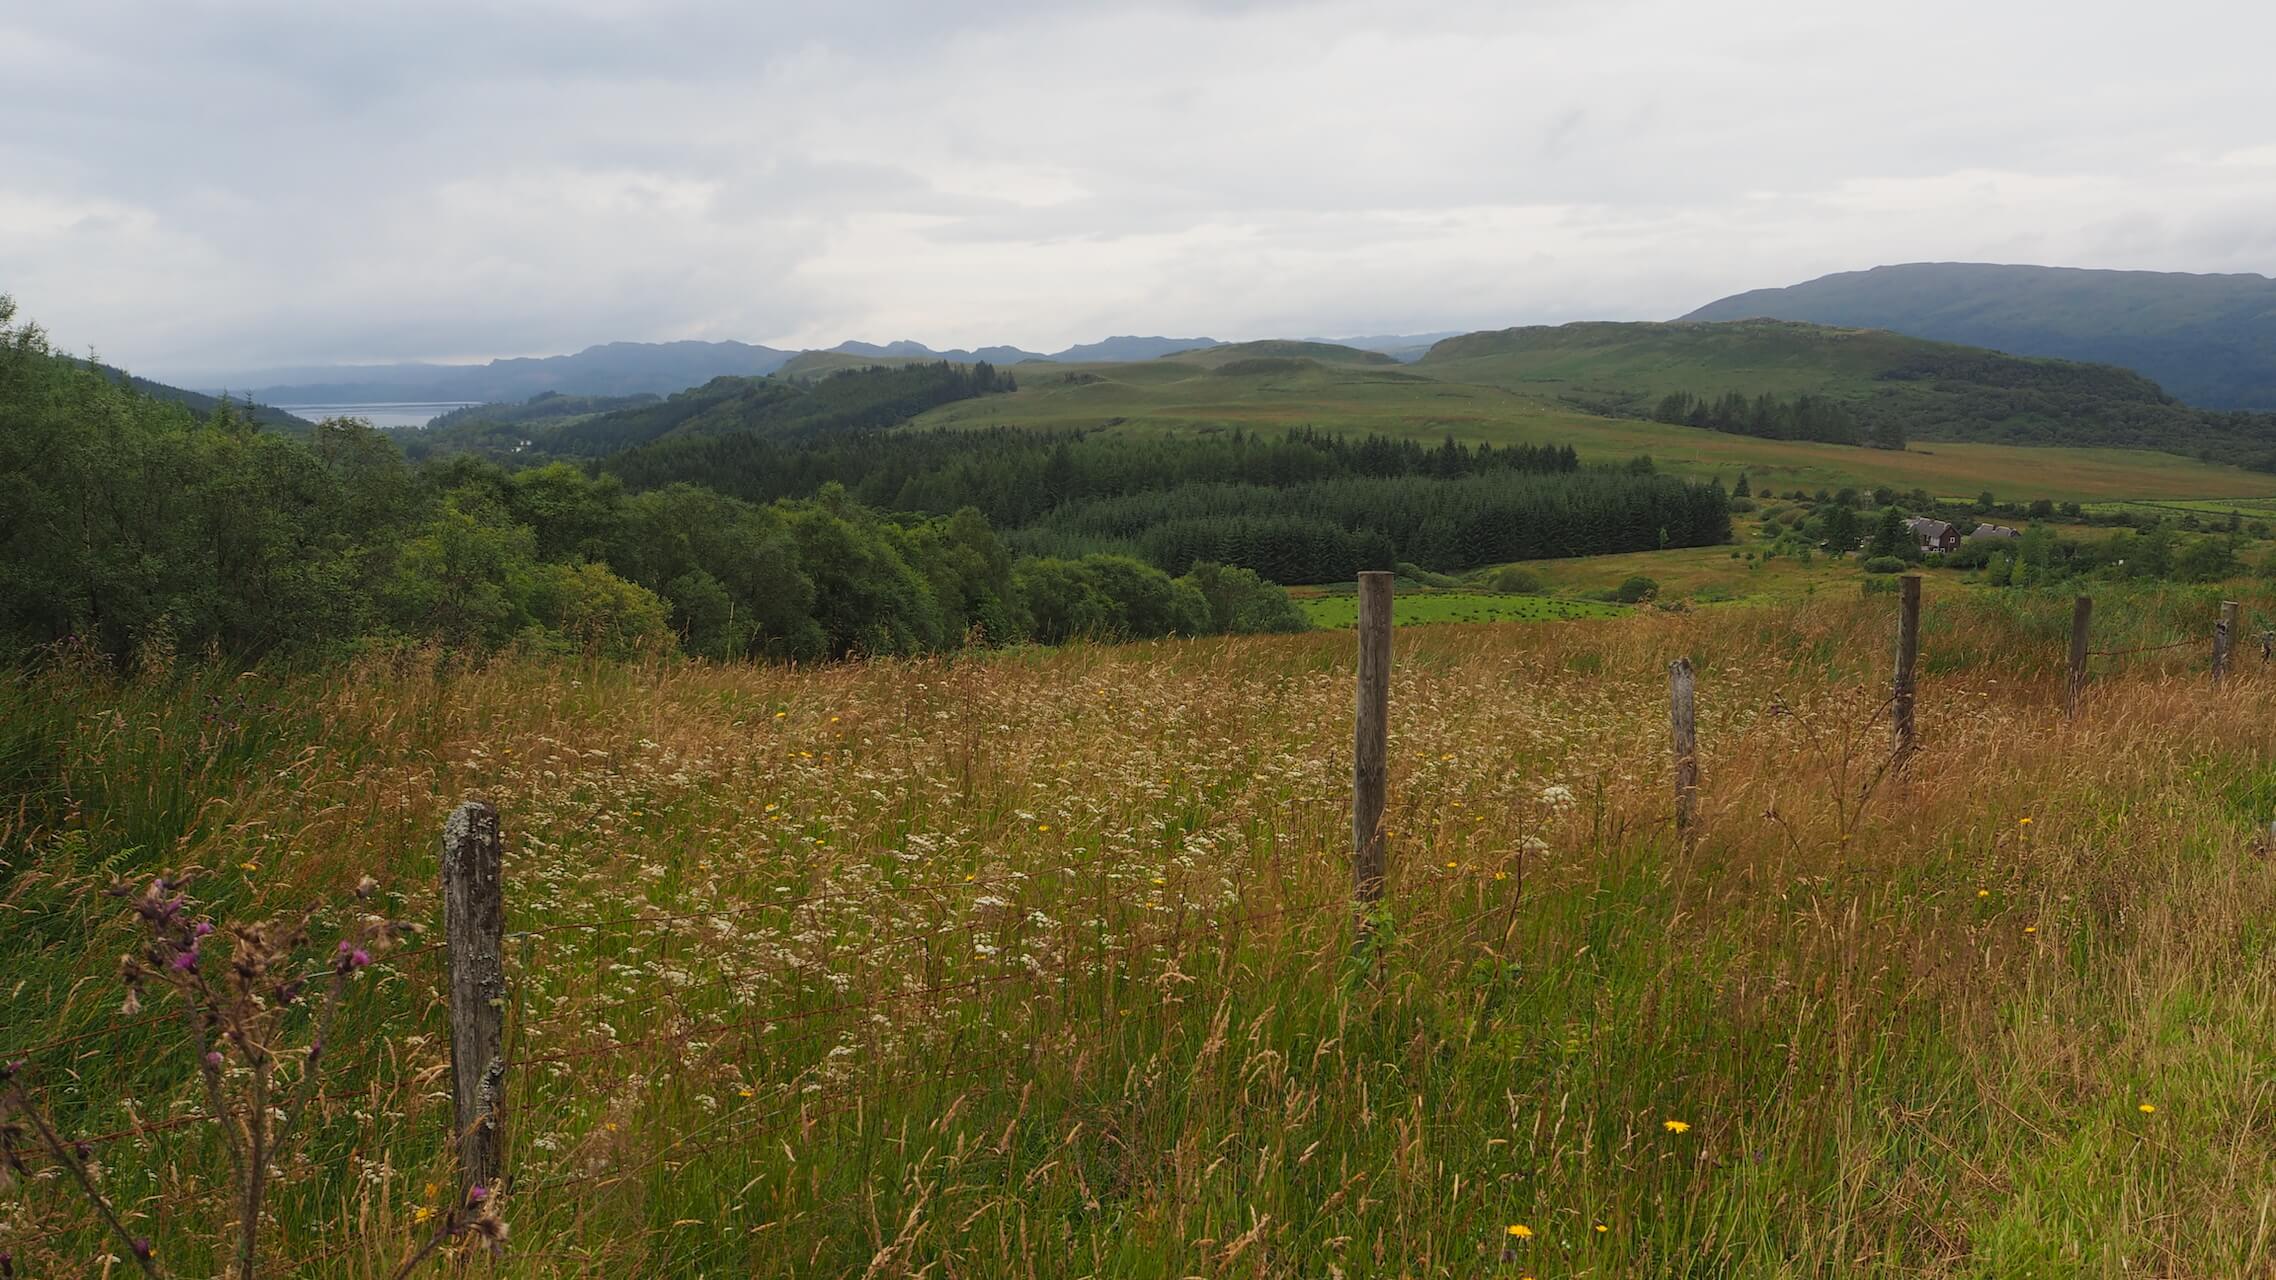 Wildflowers along the A886 on the Cowal Peninsula